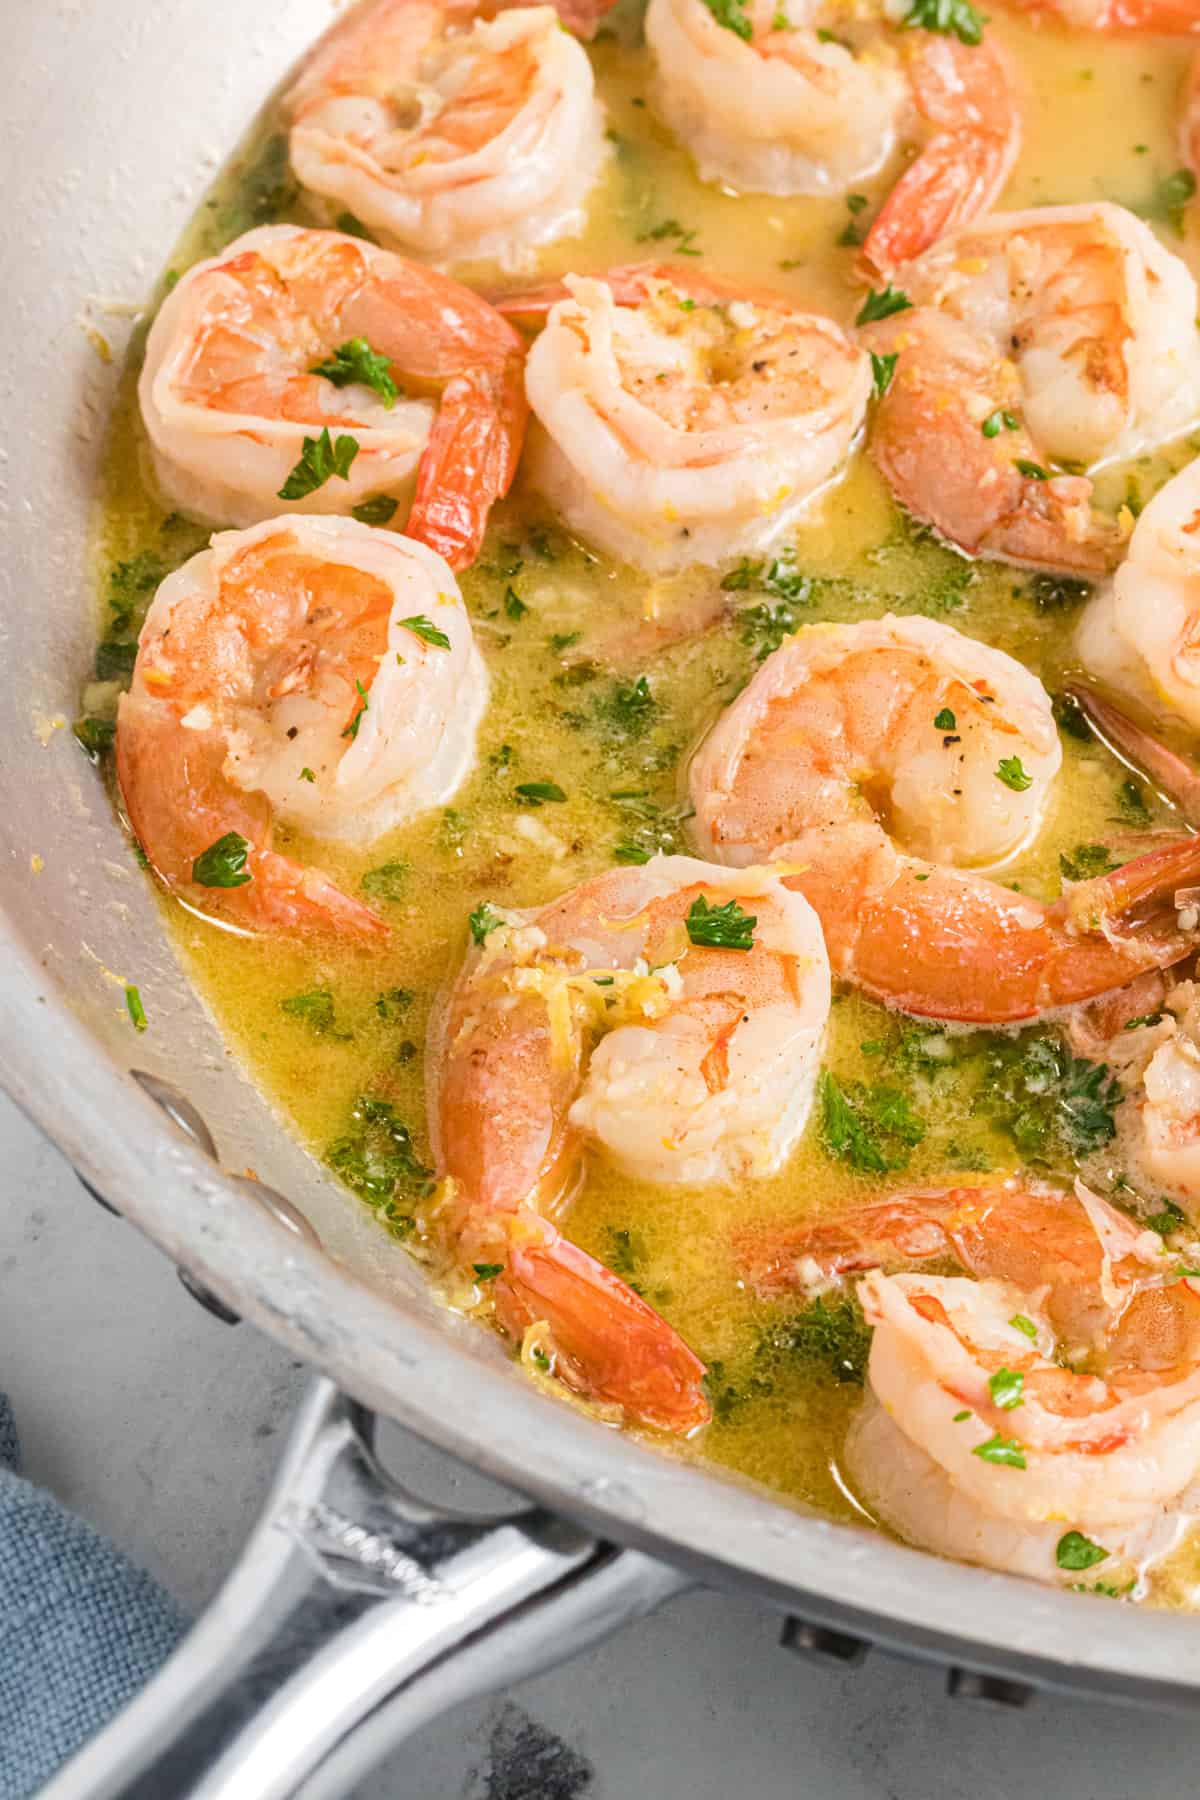 Shrimp is being cooked in a buttery sauce in a silver skillet.